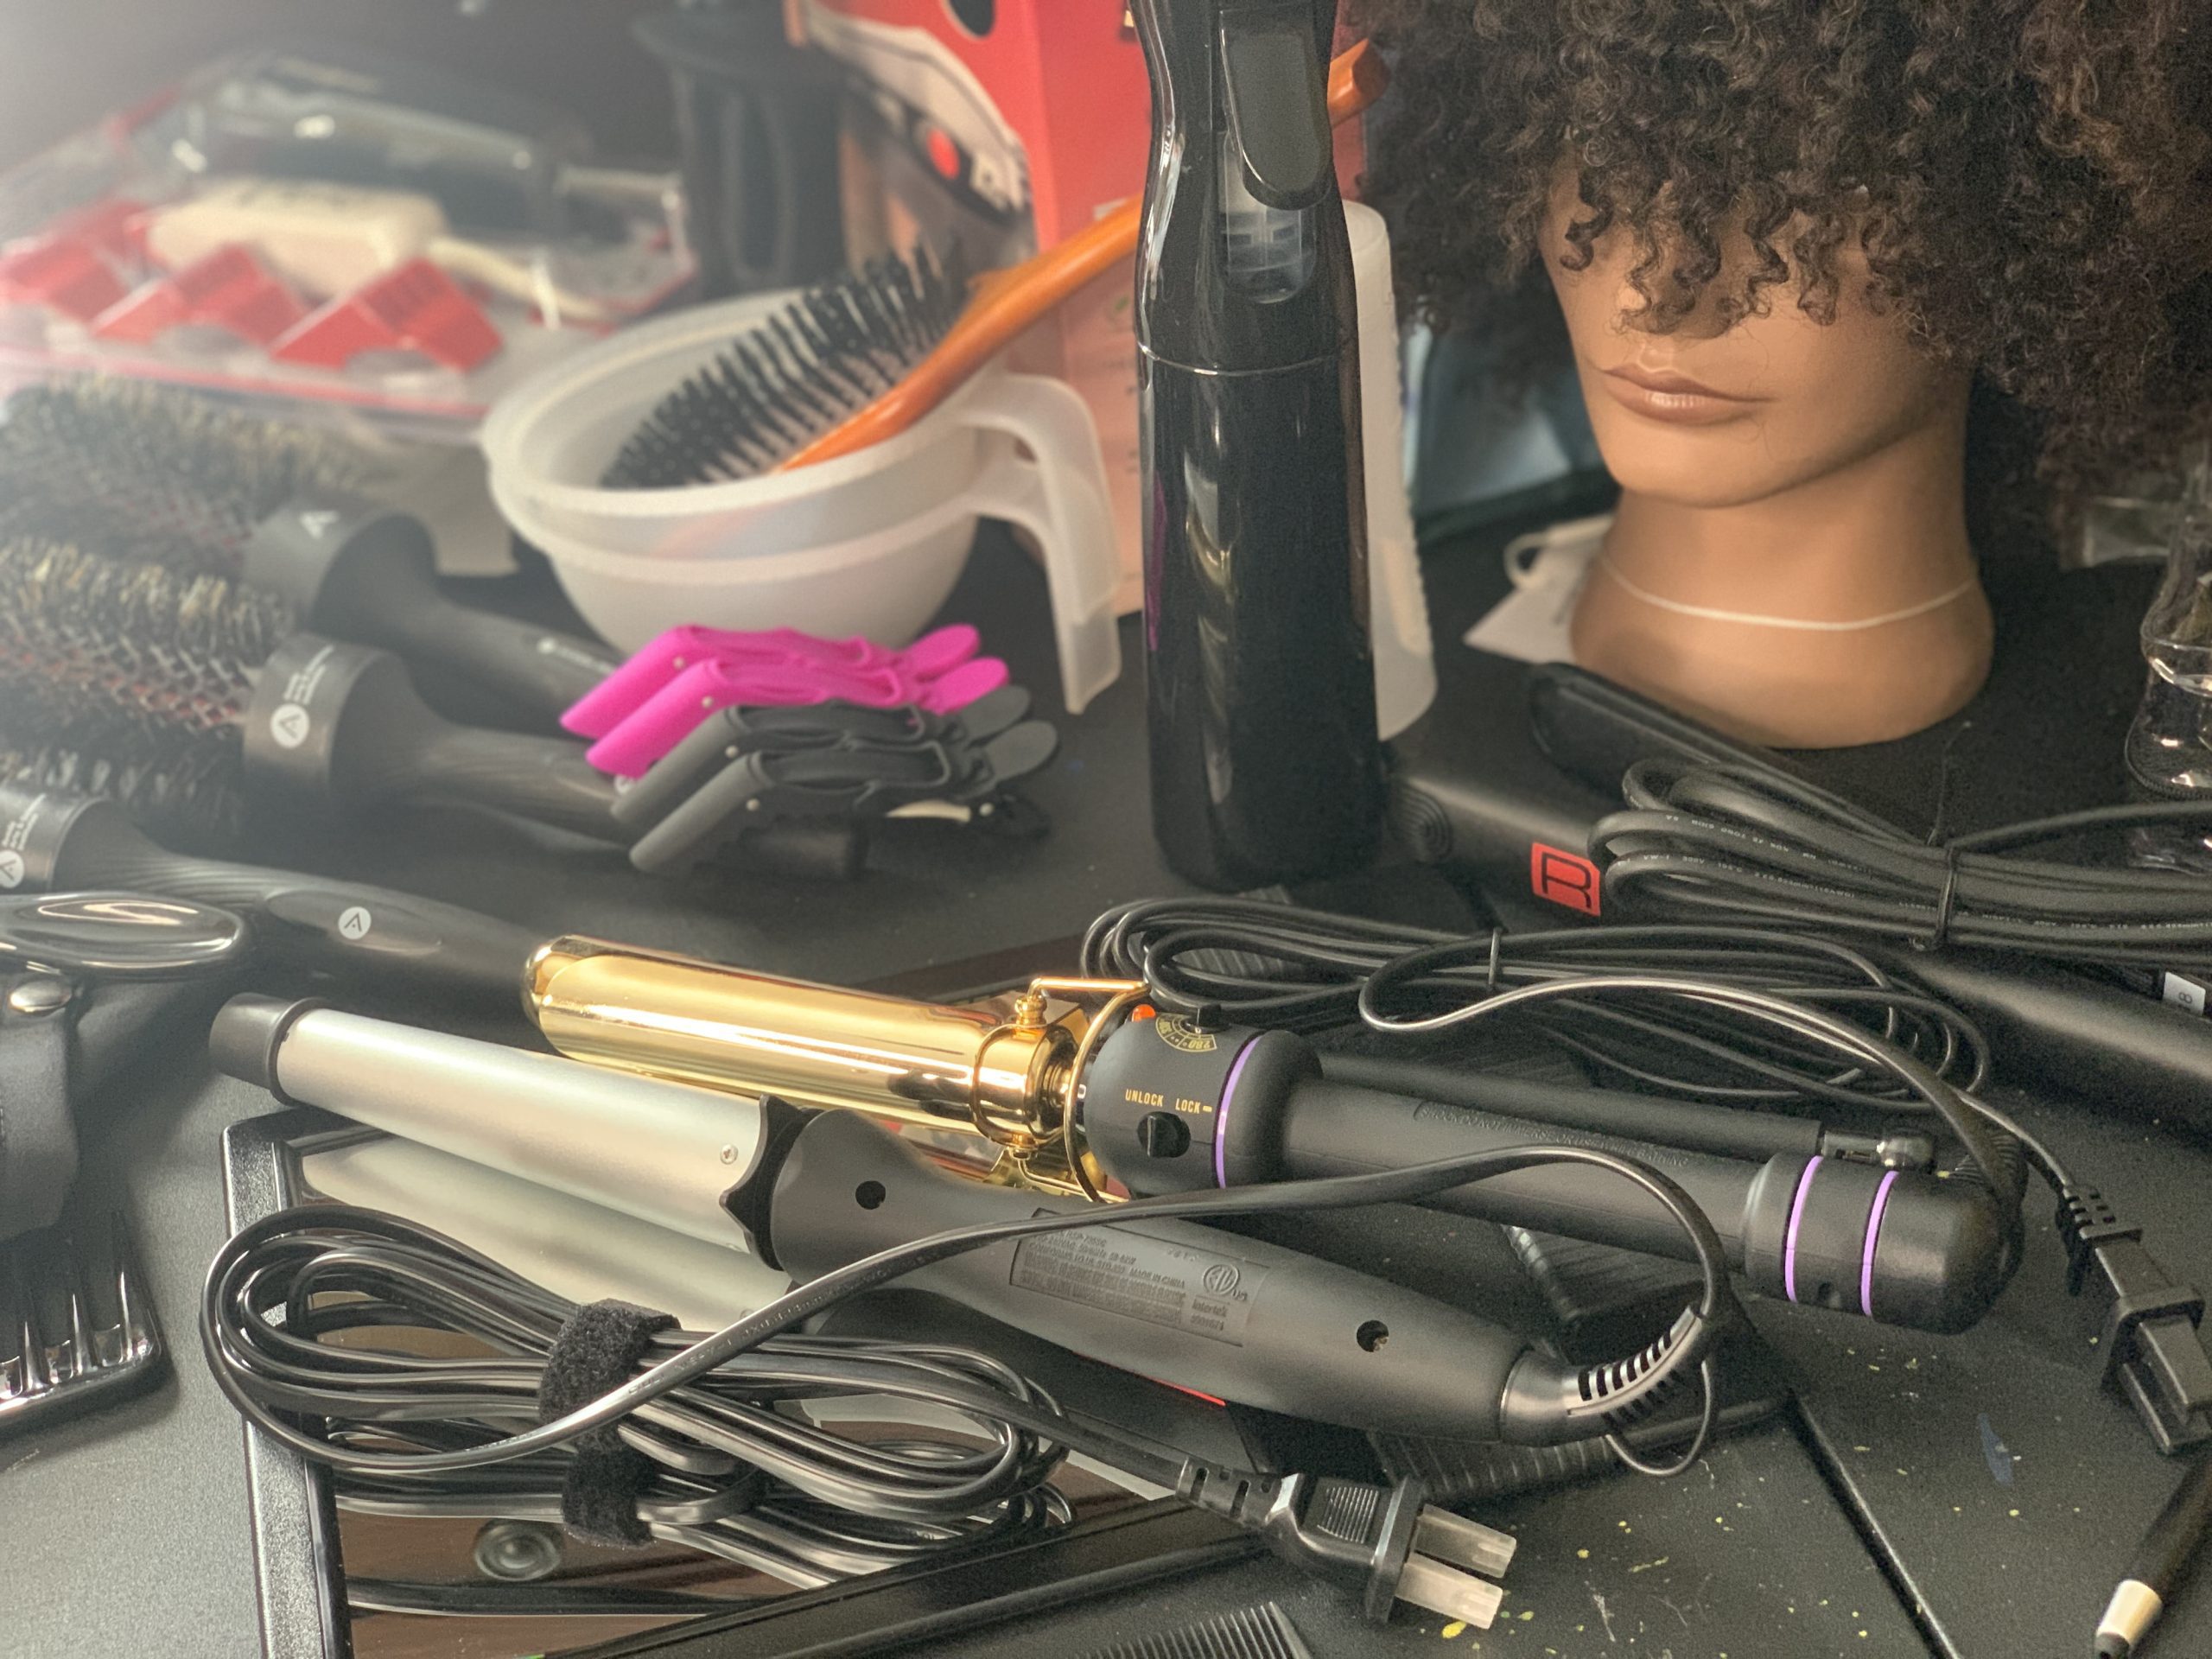 Hot Rollers Vs. Curling Wand